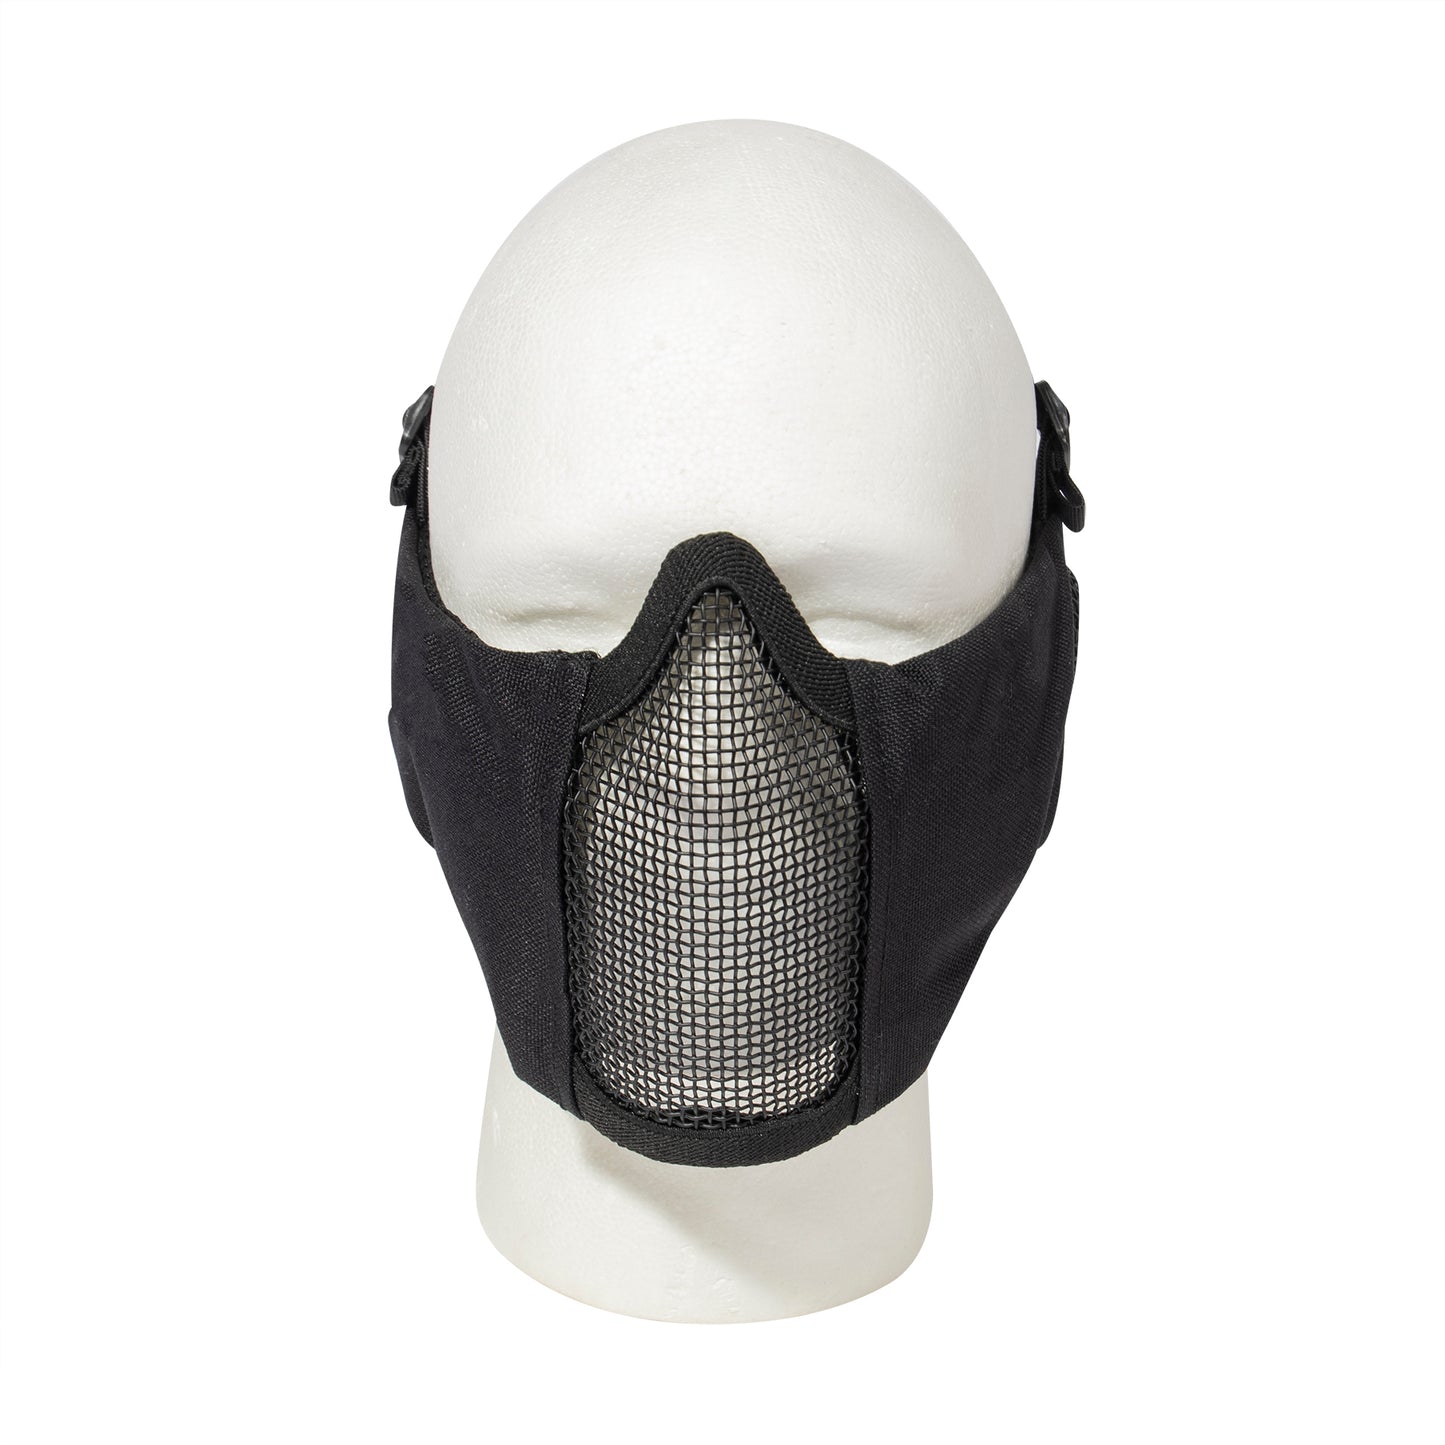 Steel Half Face Mask With Ear Guard - Black